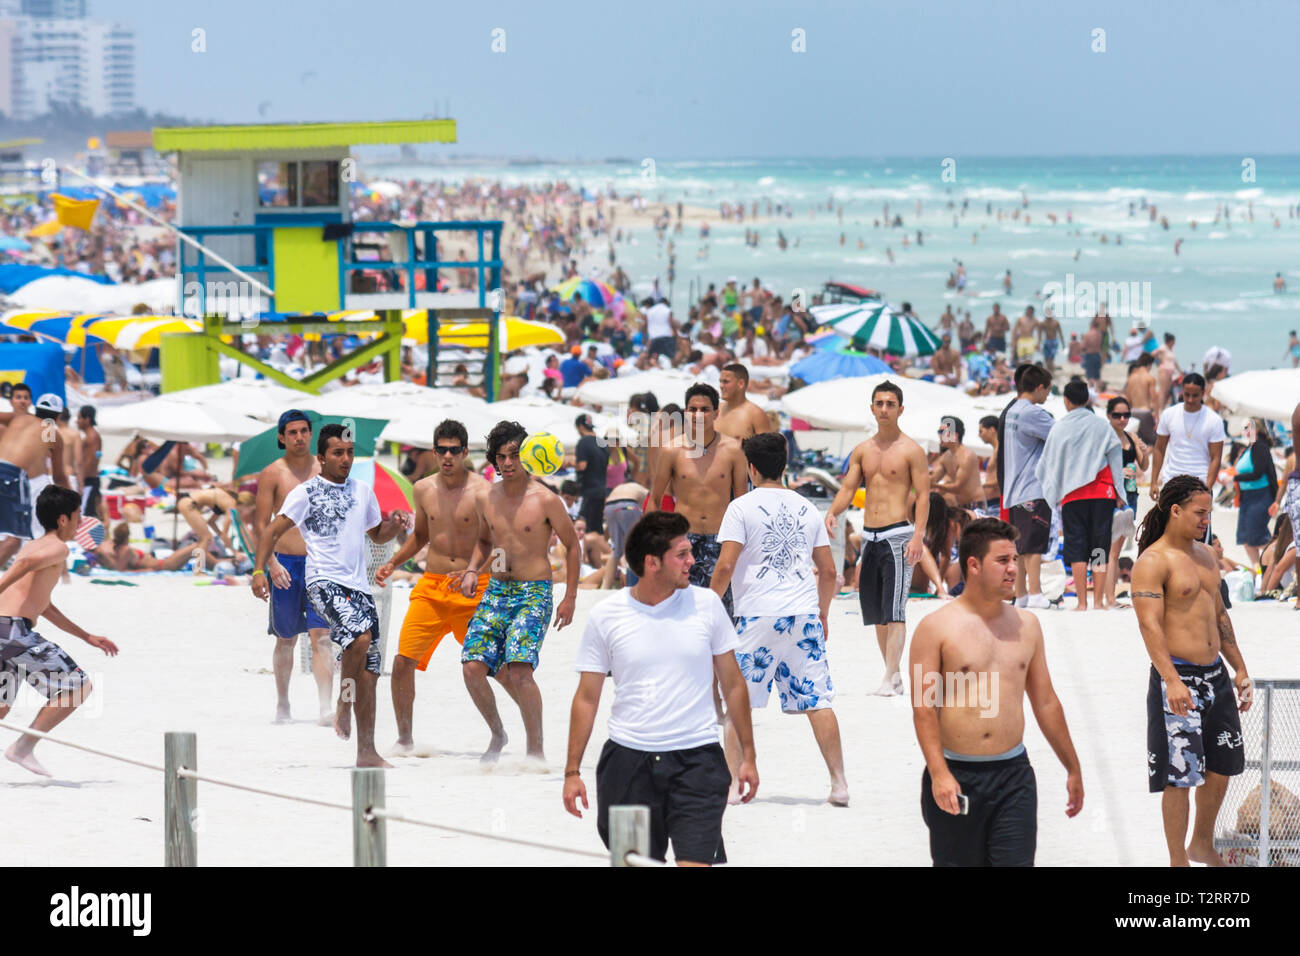 Miami Beach Florida,Atlantic Ocean,water,shore,Spring Break,men,young adults,bathing suits,crowded,surf,student students soccer game,play,lifeguard st Stock Photo